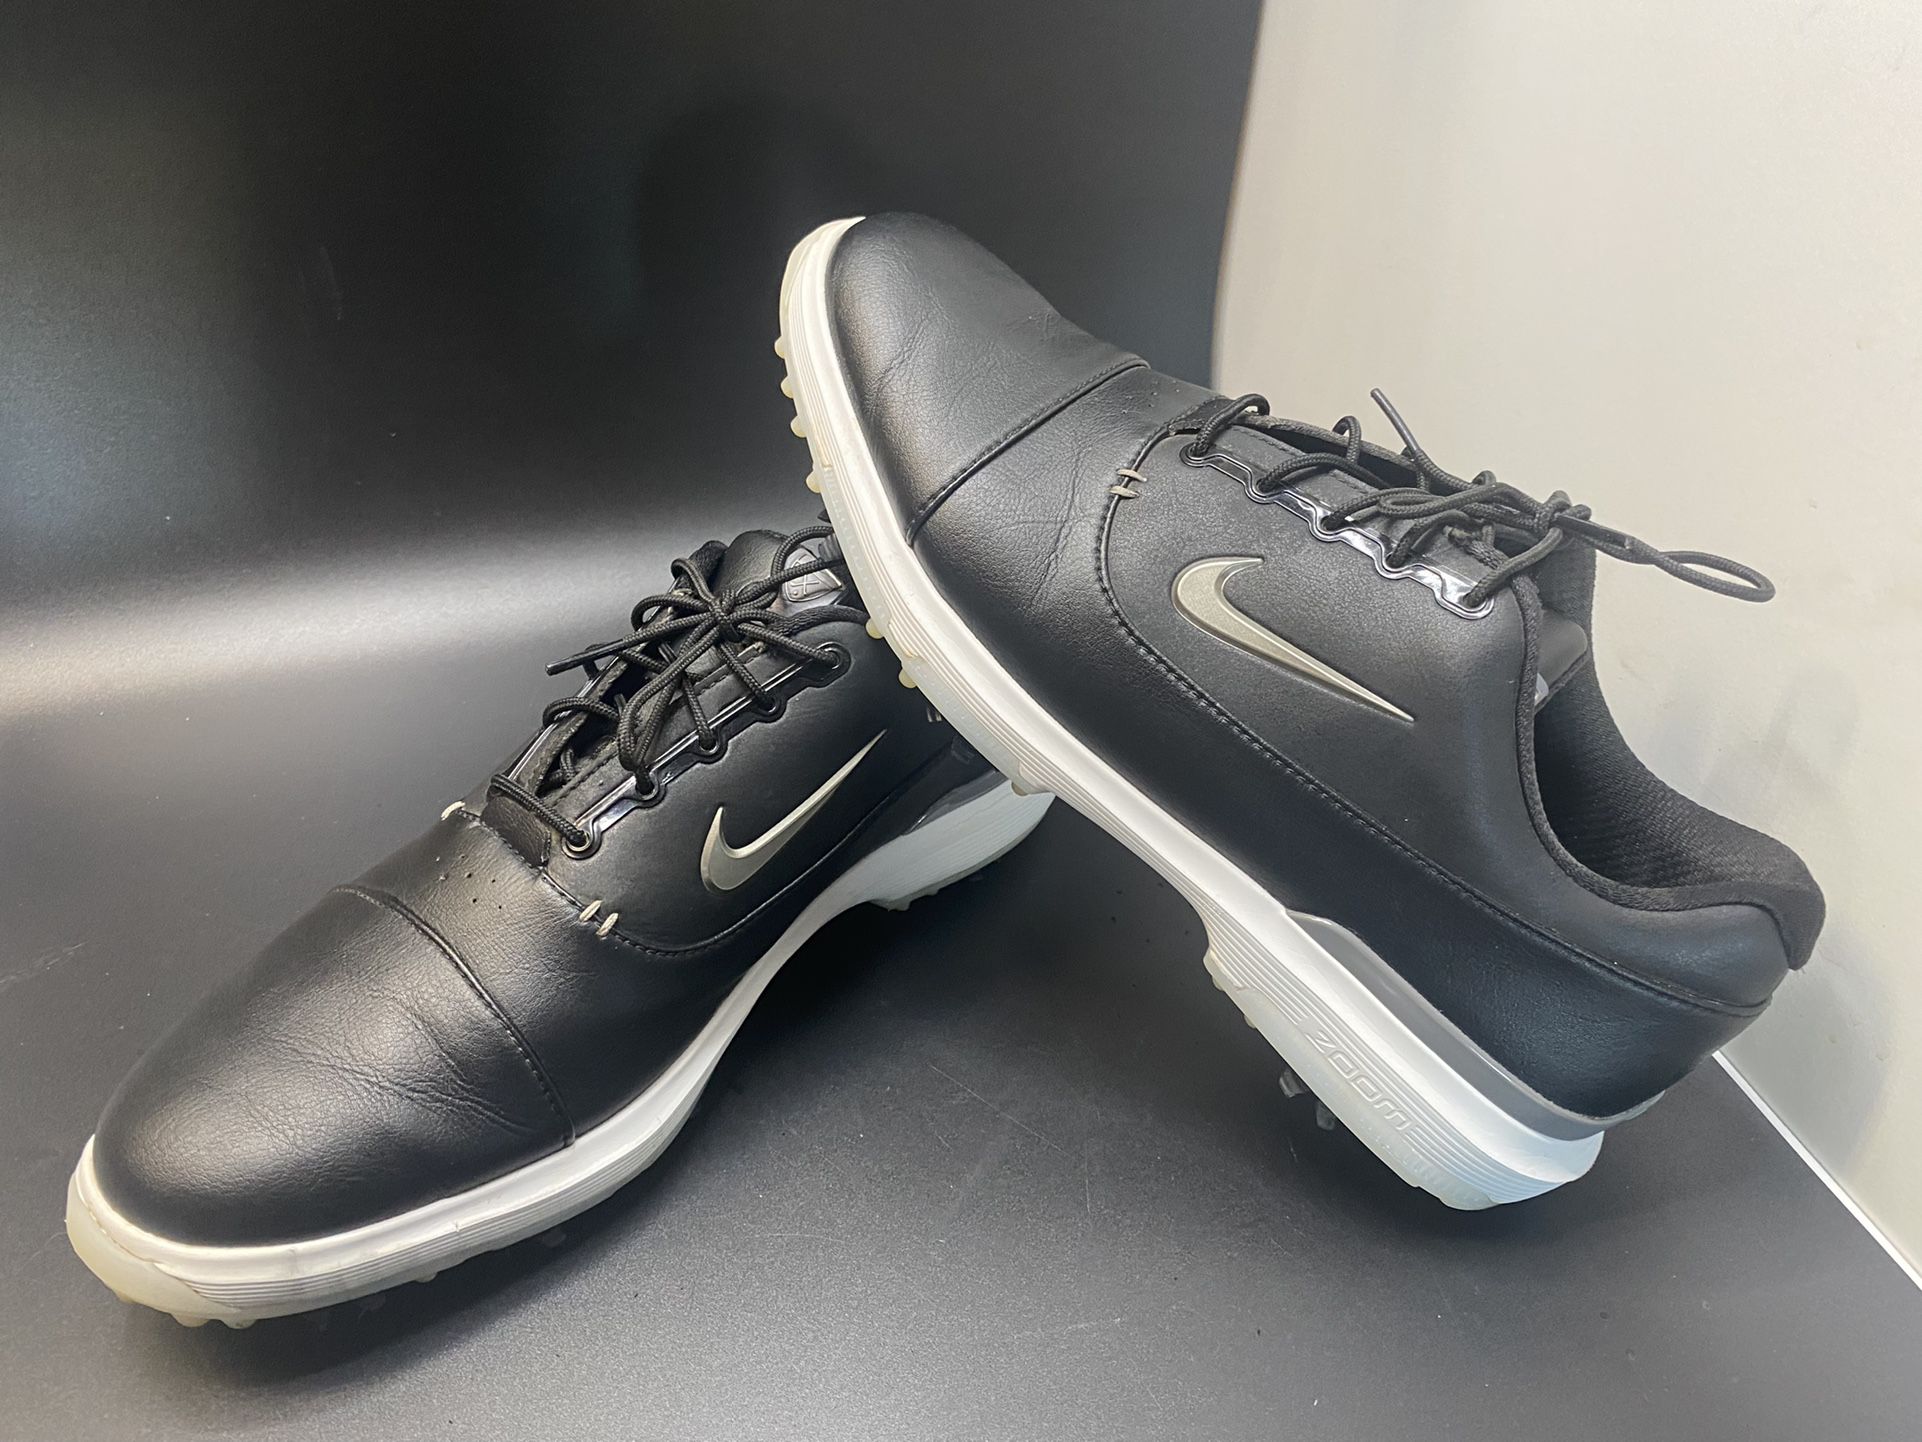 Nike Air Zoom Victory Pro Golf Shoes Leather AR5577-001 Black Men's Sz 12